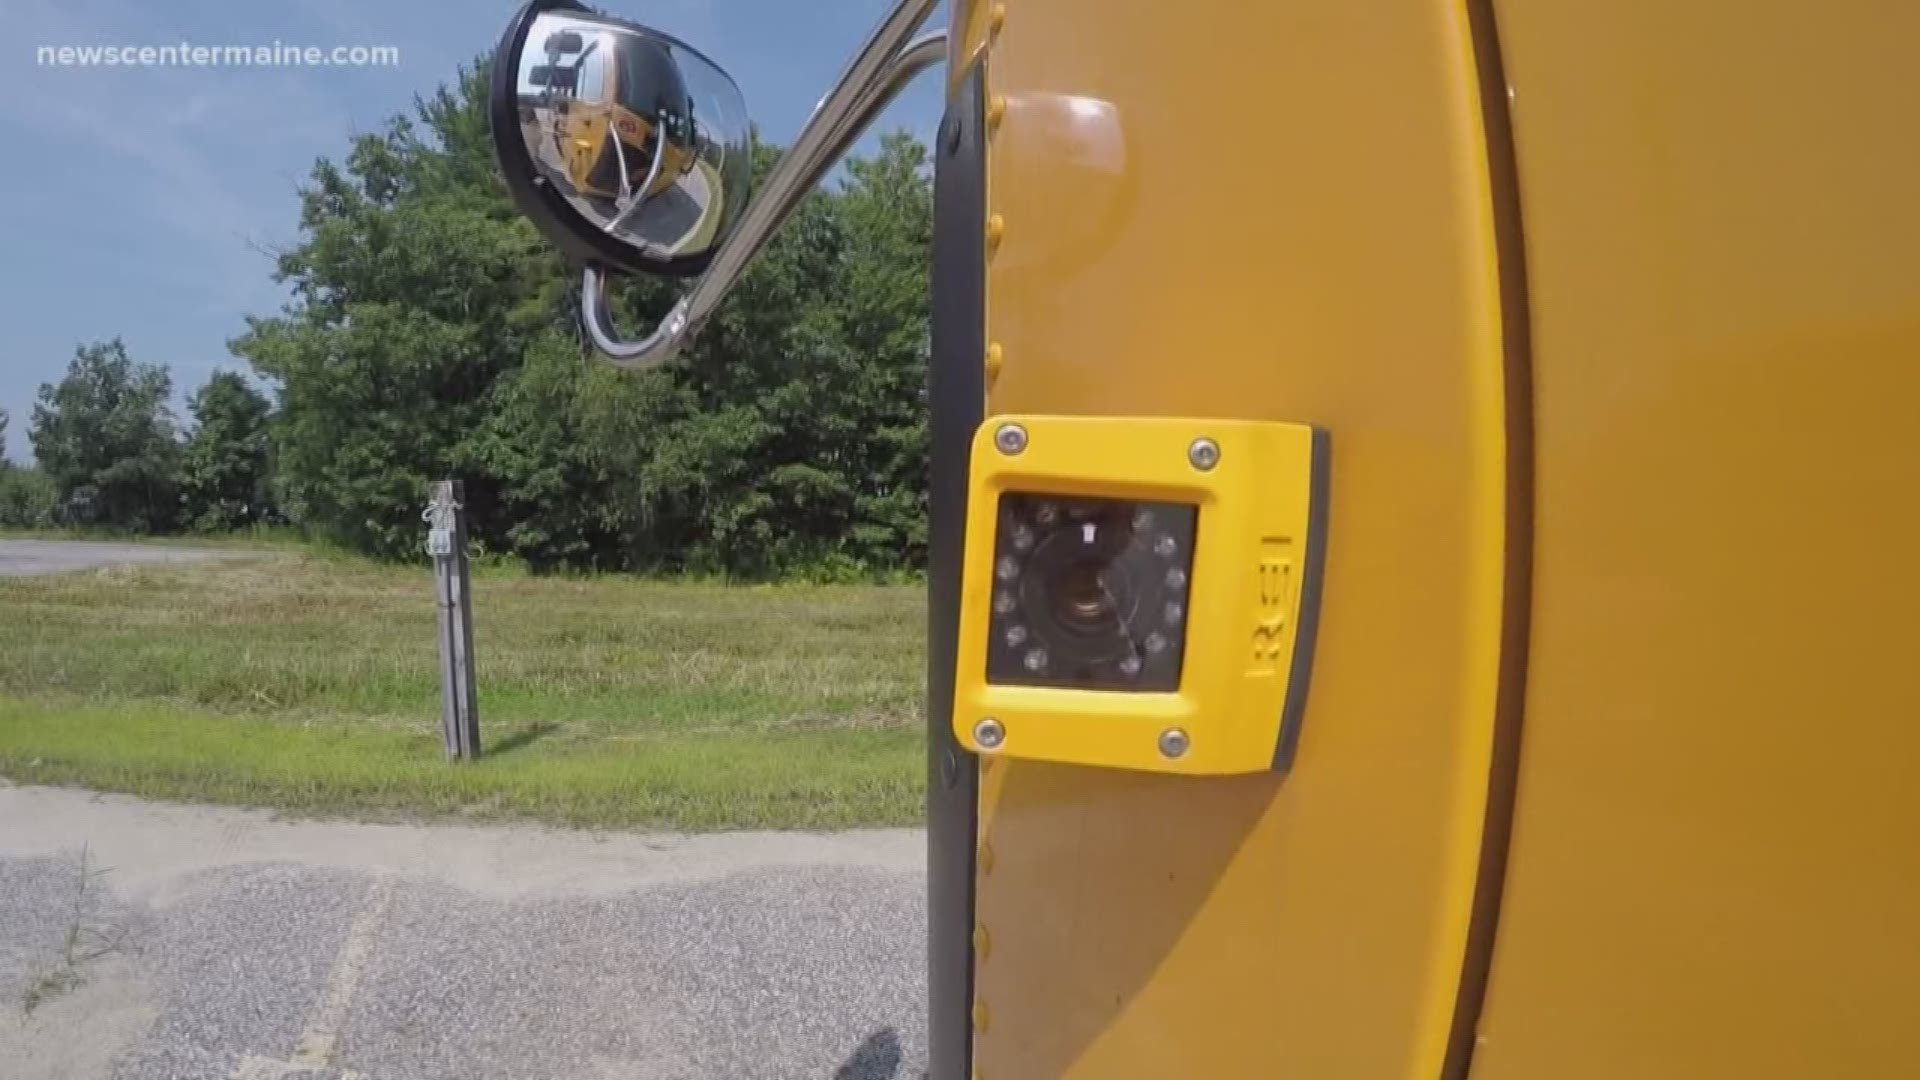 NOW: School buses adding new cameras to improve safety